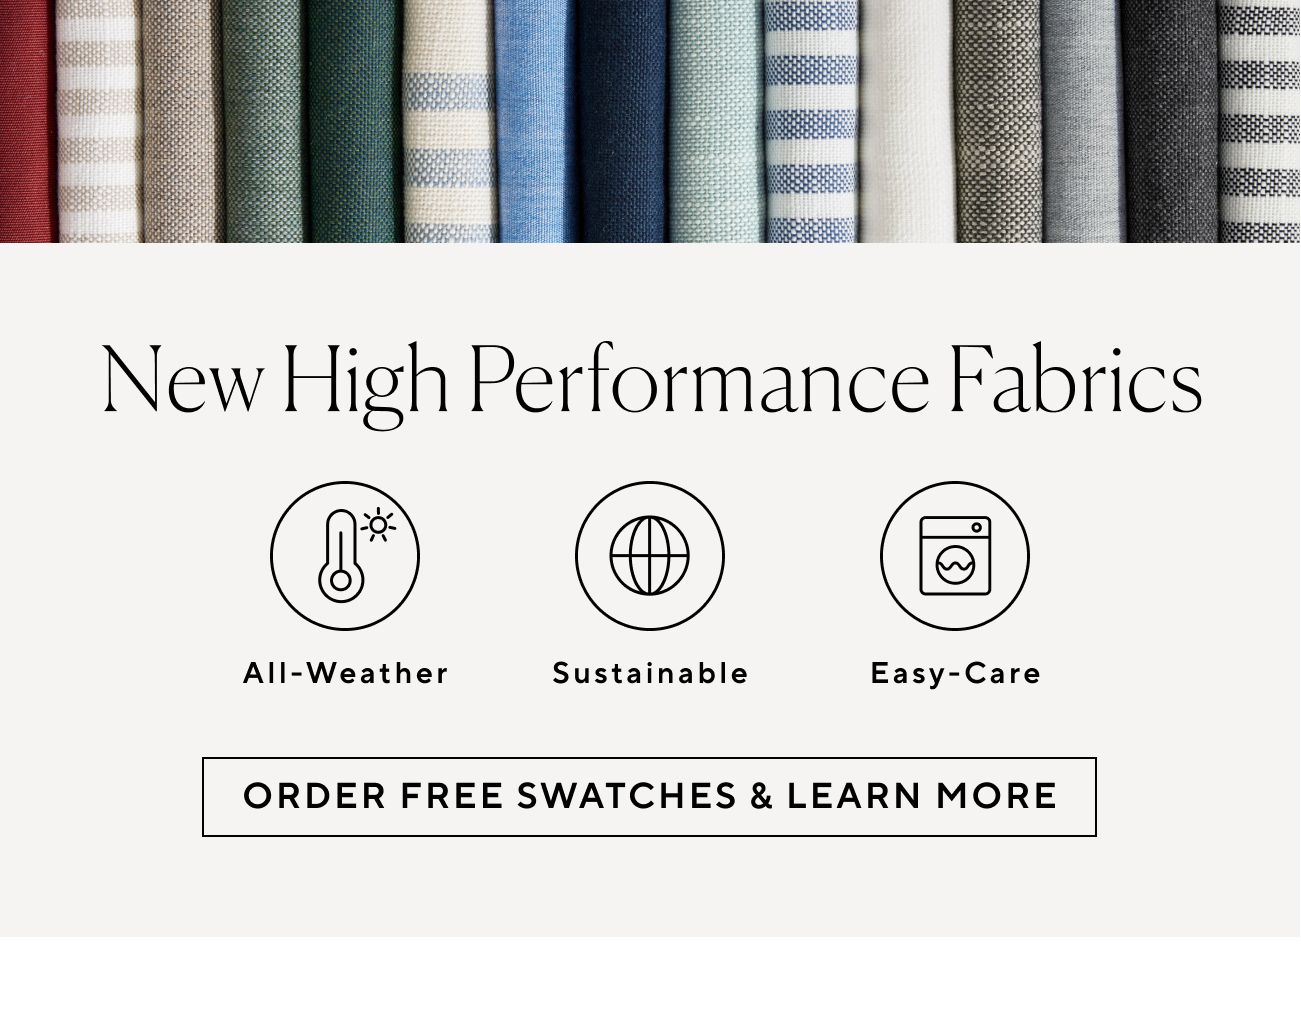  New High Performance Fabrics All-Weather Sustainable Easy-Care ORDER FREE SWATCHES LEARN MORE 